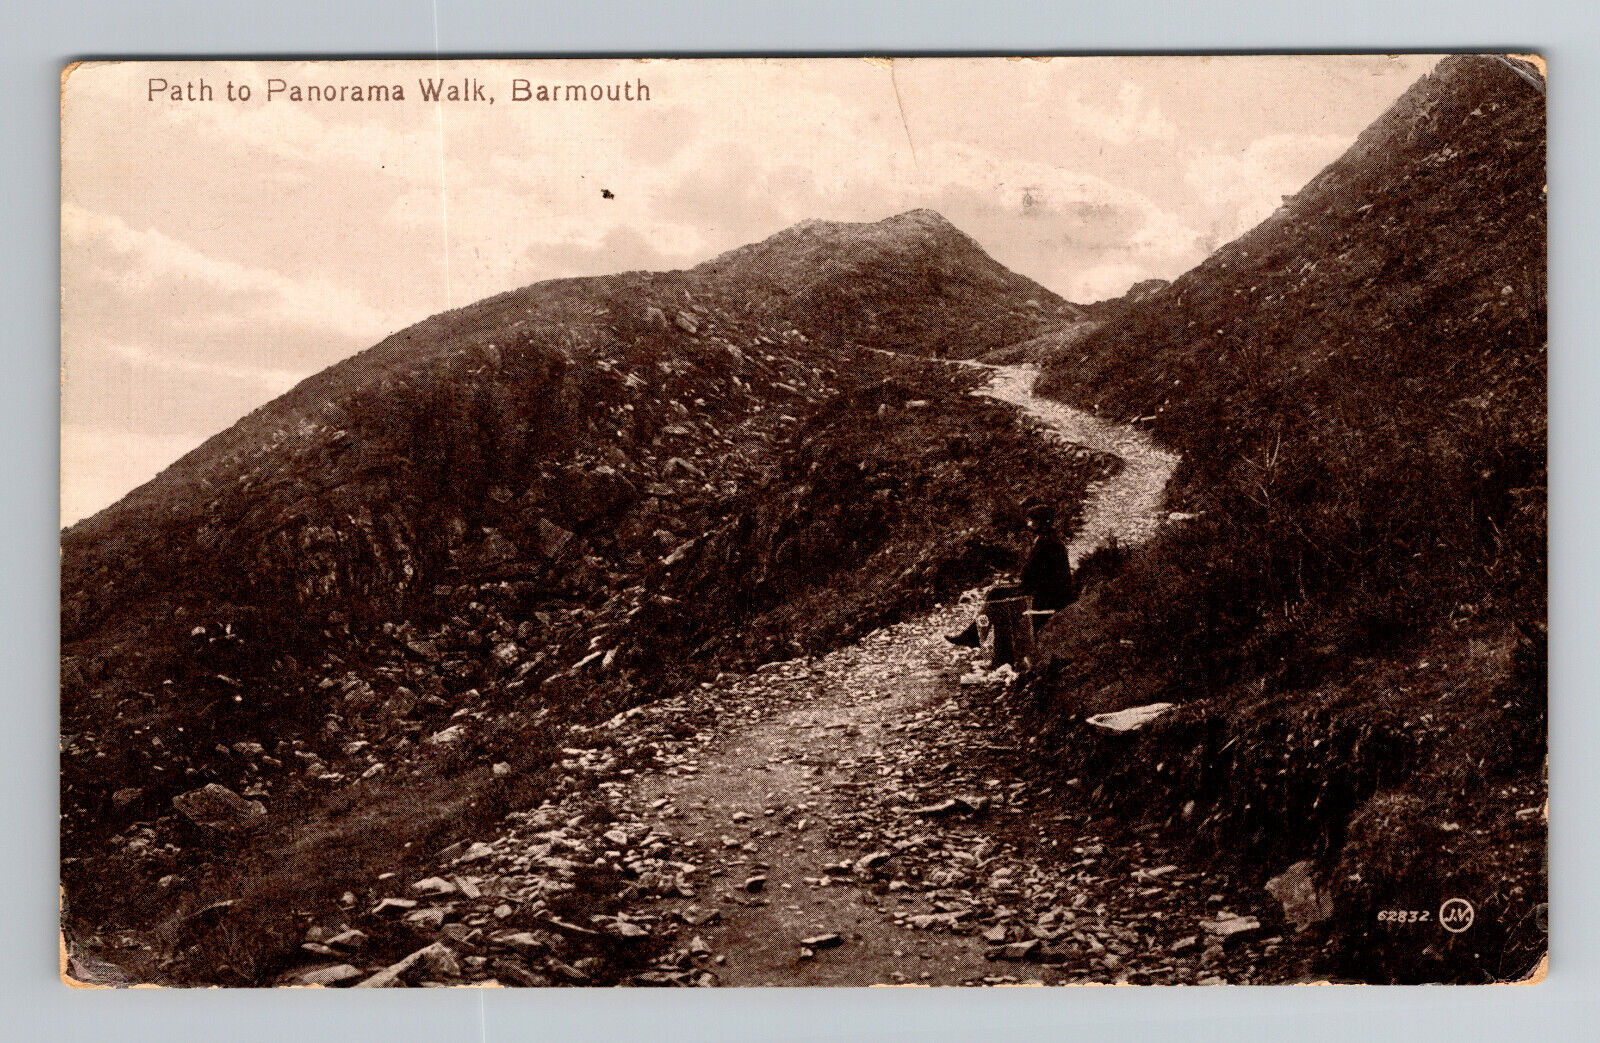 Vintage Postcard from Early 20th Century: Path to Panorama Walk, Barmouth